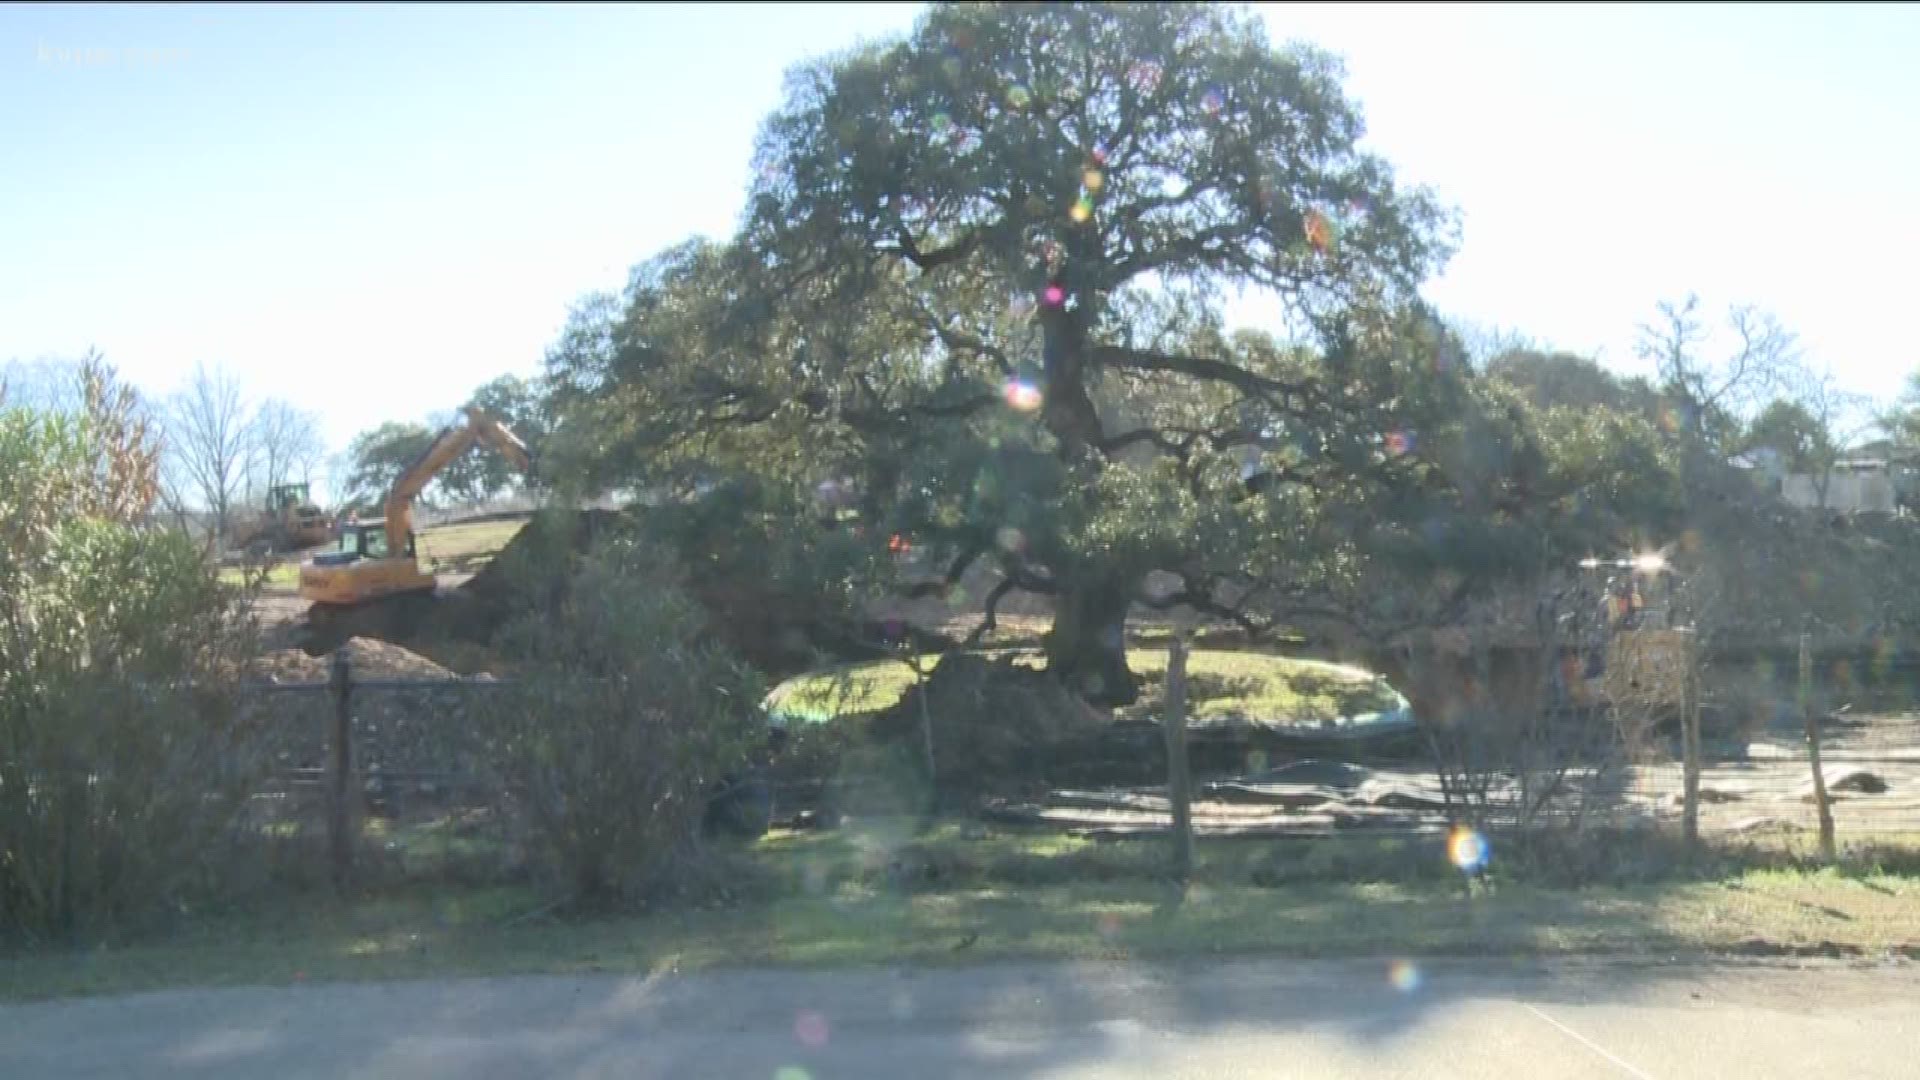 The City of Buda is asking for help from the public to name a heritage oak tree in town.